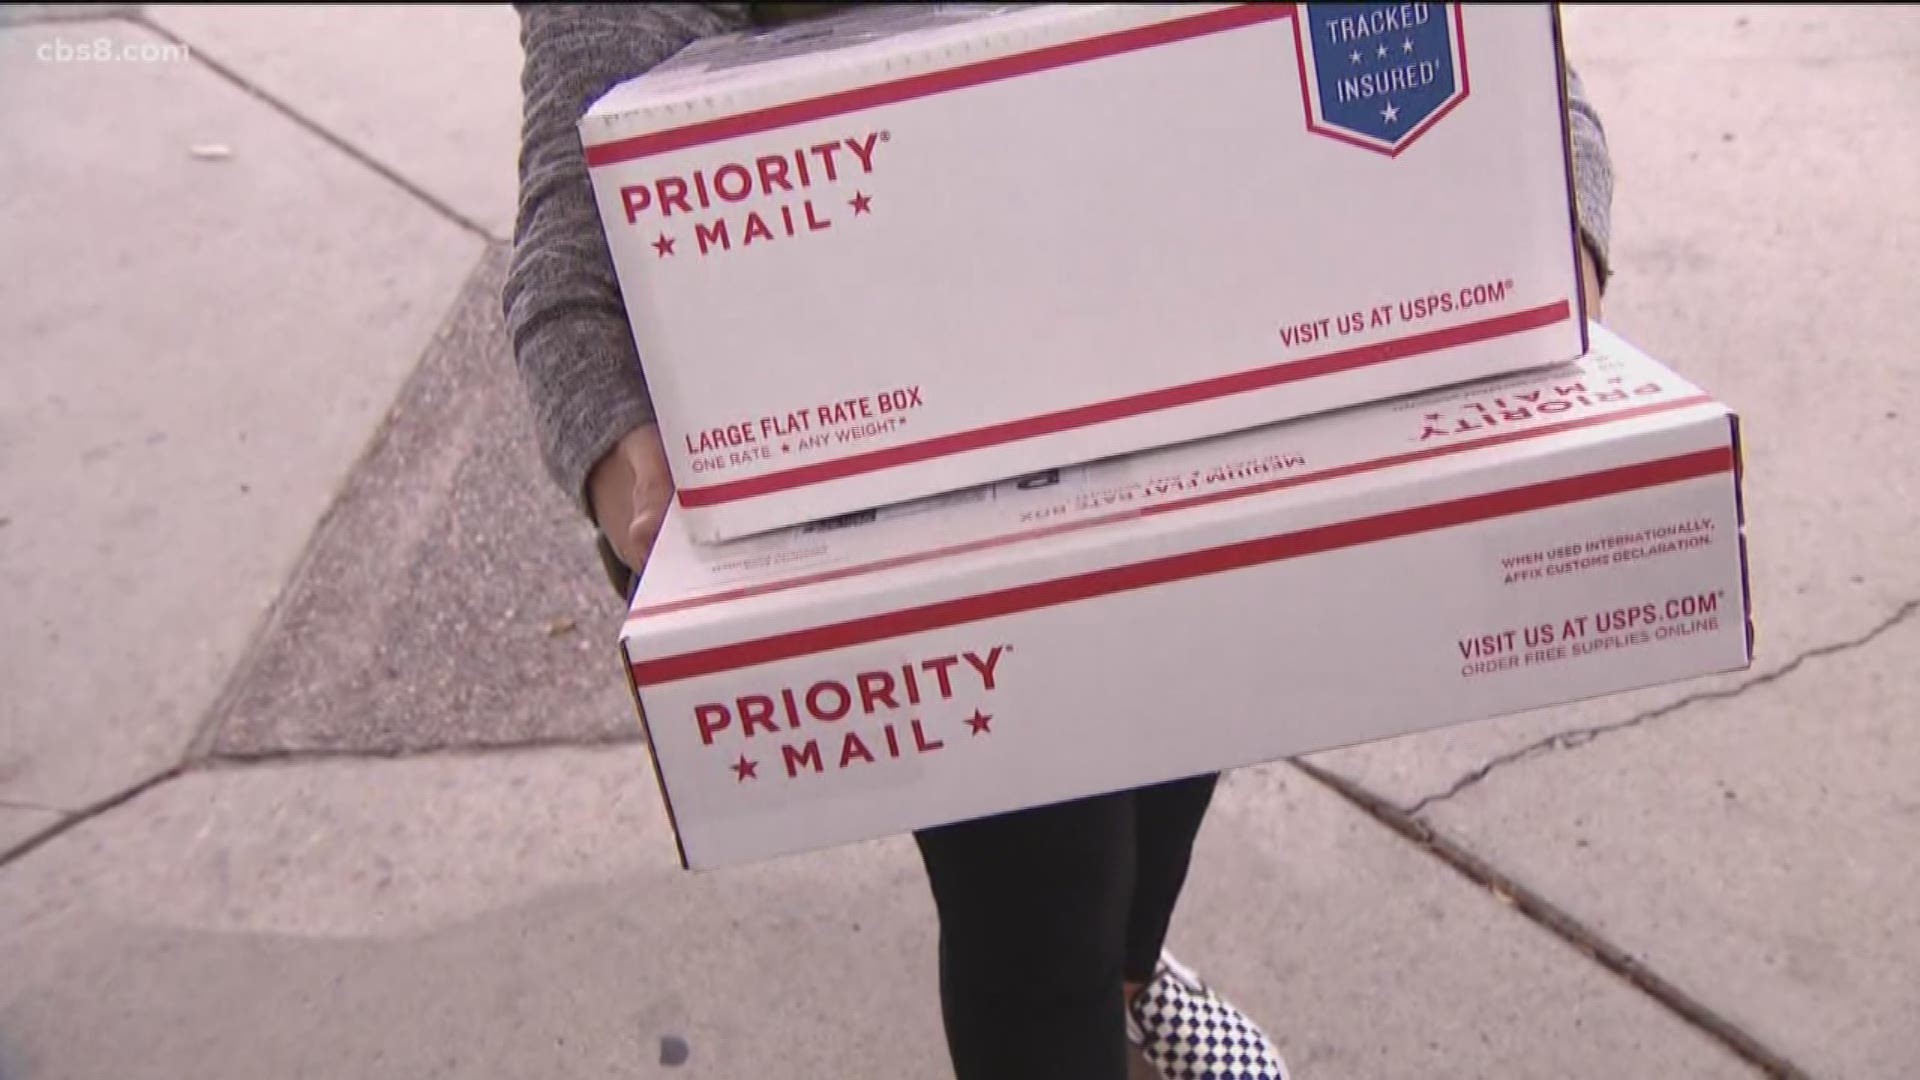 Amazon’s Prime Day – which actually lasts two days – kicked off Monday which means the next few days will be prime time for porch pirates to strike. But there are some steps you can take to protect your packages.   

The annual two-day Prime event features thousands of deals expected to bring in $5.8-billion in sales. But unfortunately, those sales mean thieves will be lurking.